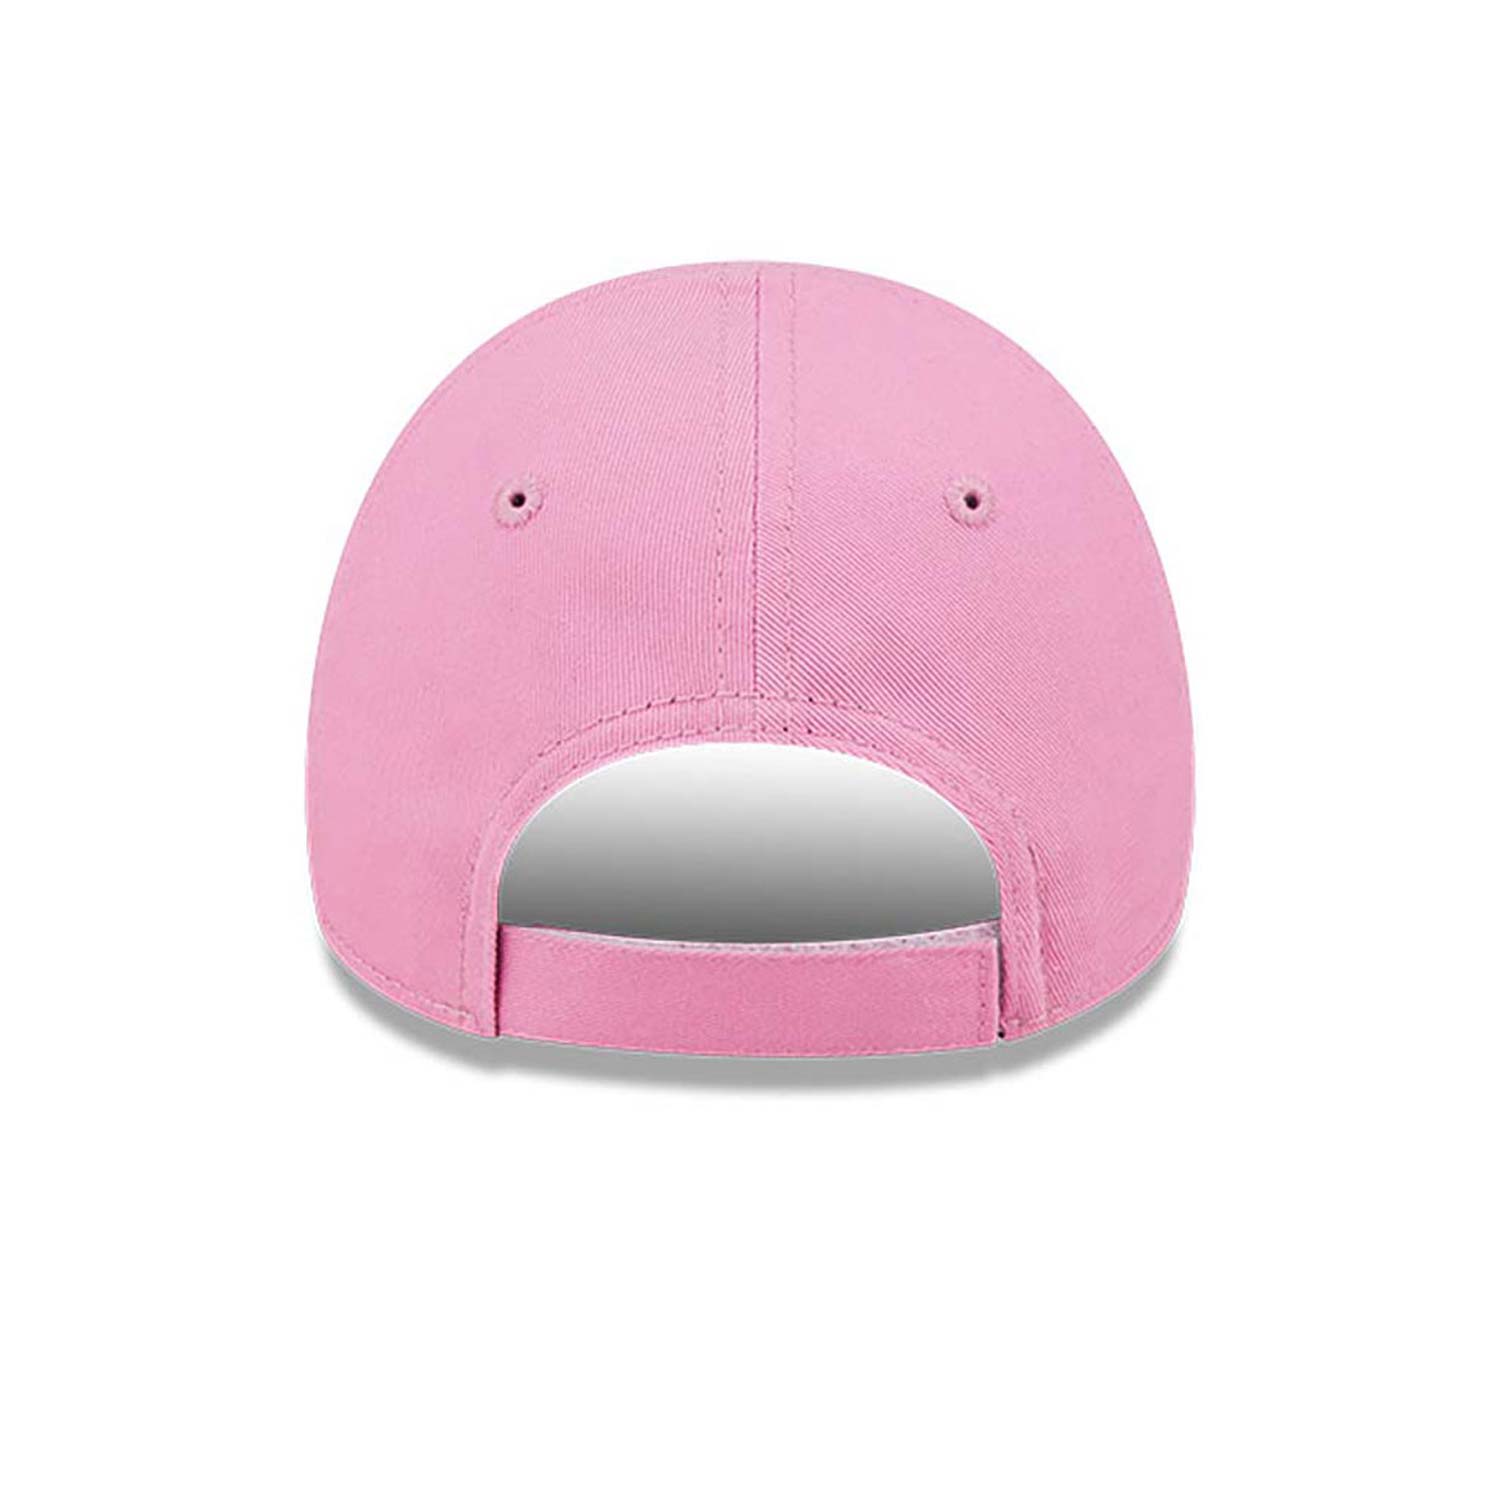 New York Yankees Toddler League Essential Pink 9FORTY Cap